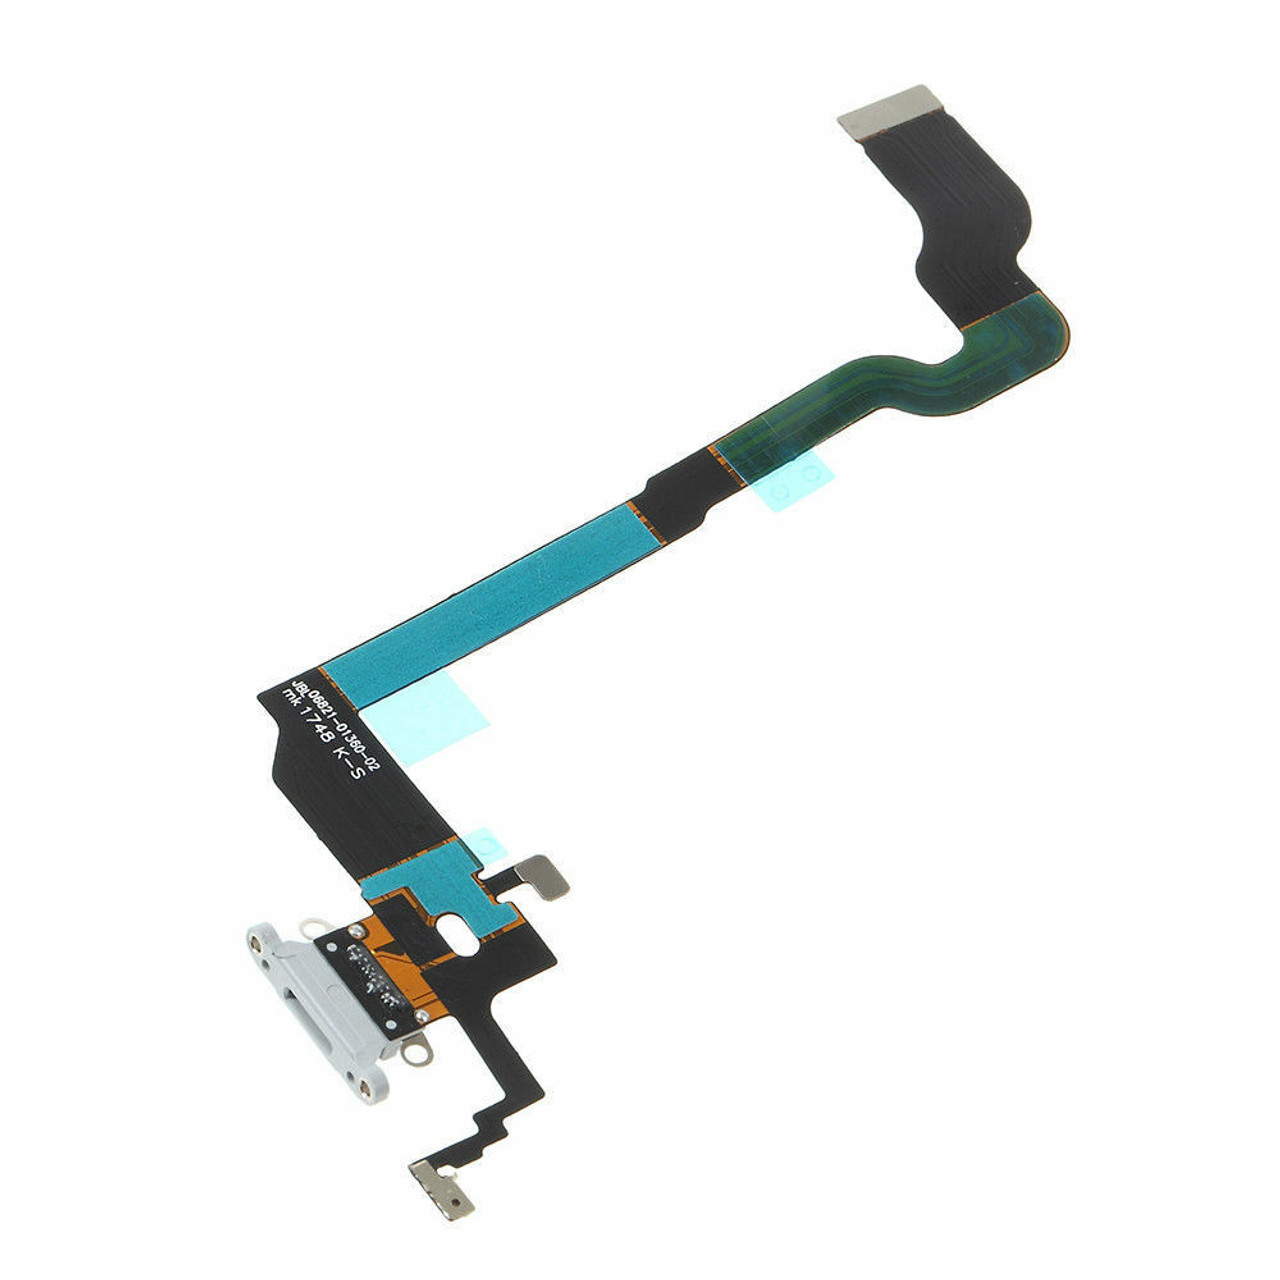 OEM White Charging Port Headphone Jack Mic Flex Cable For iPhone X 5.8'' USB USA